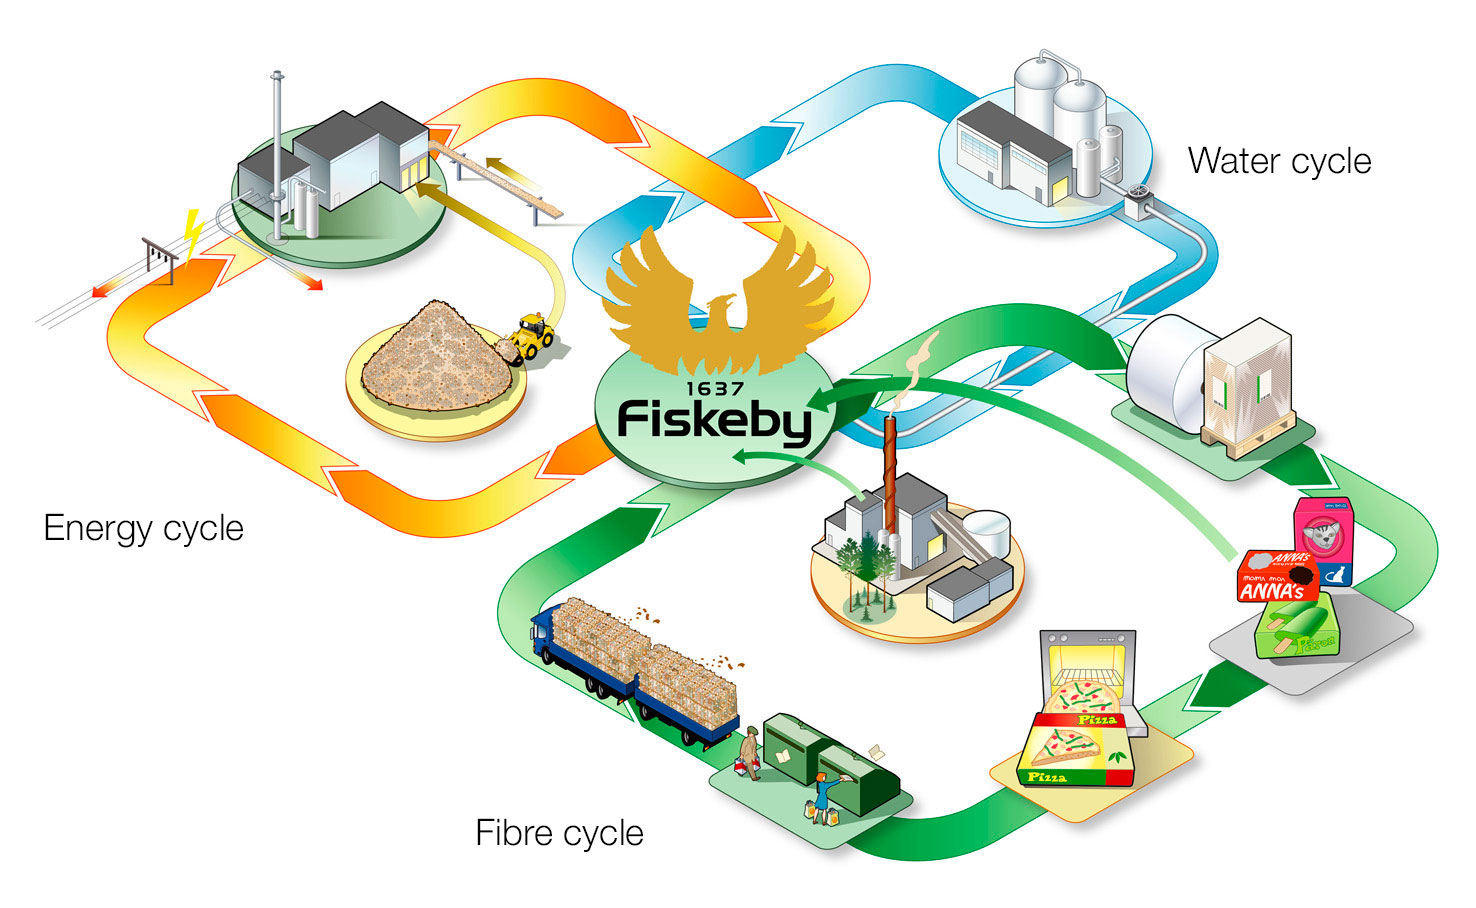 Fiskeby’s sustainable cycles